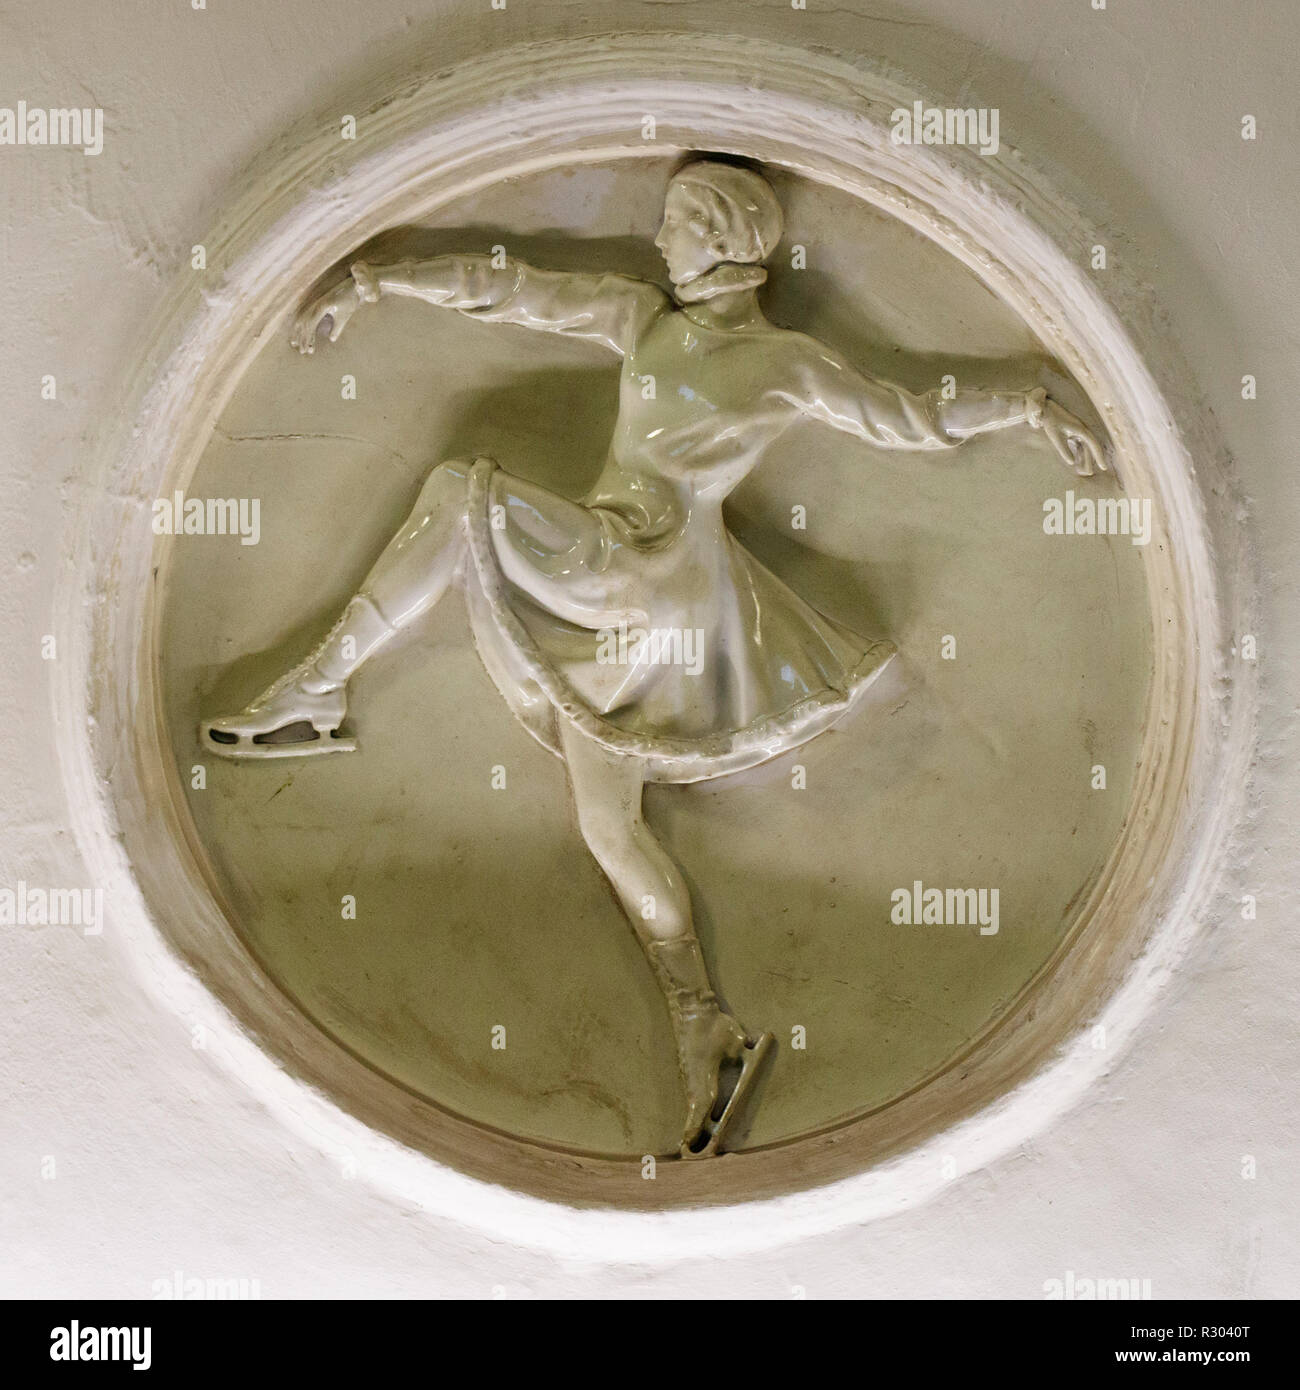 Plaster roundel depicting an ice skater in the Moscow Metro station of Dinamo, Russia. Said to bring luck to similar sports people that visit them. Stock Photo